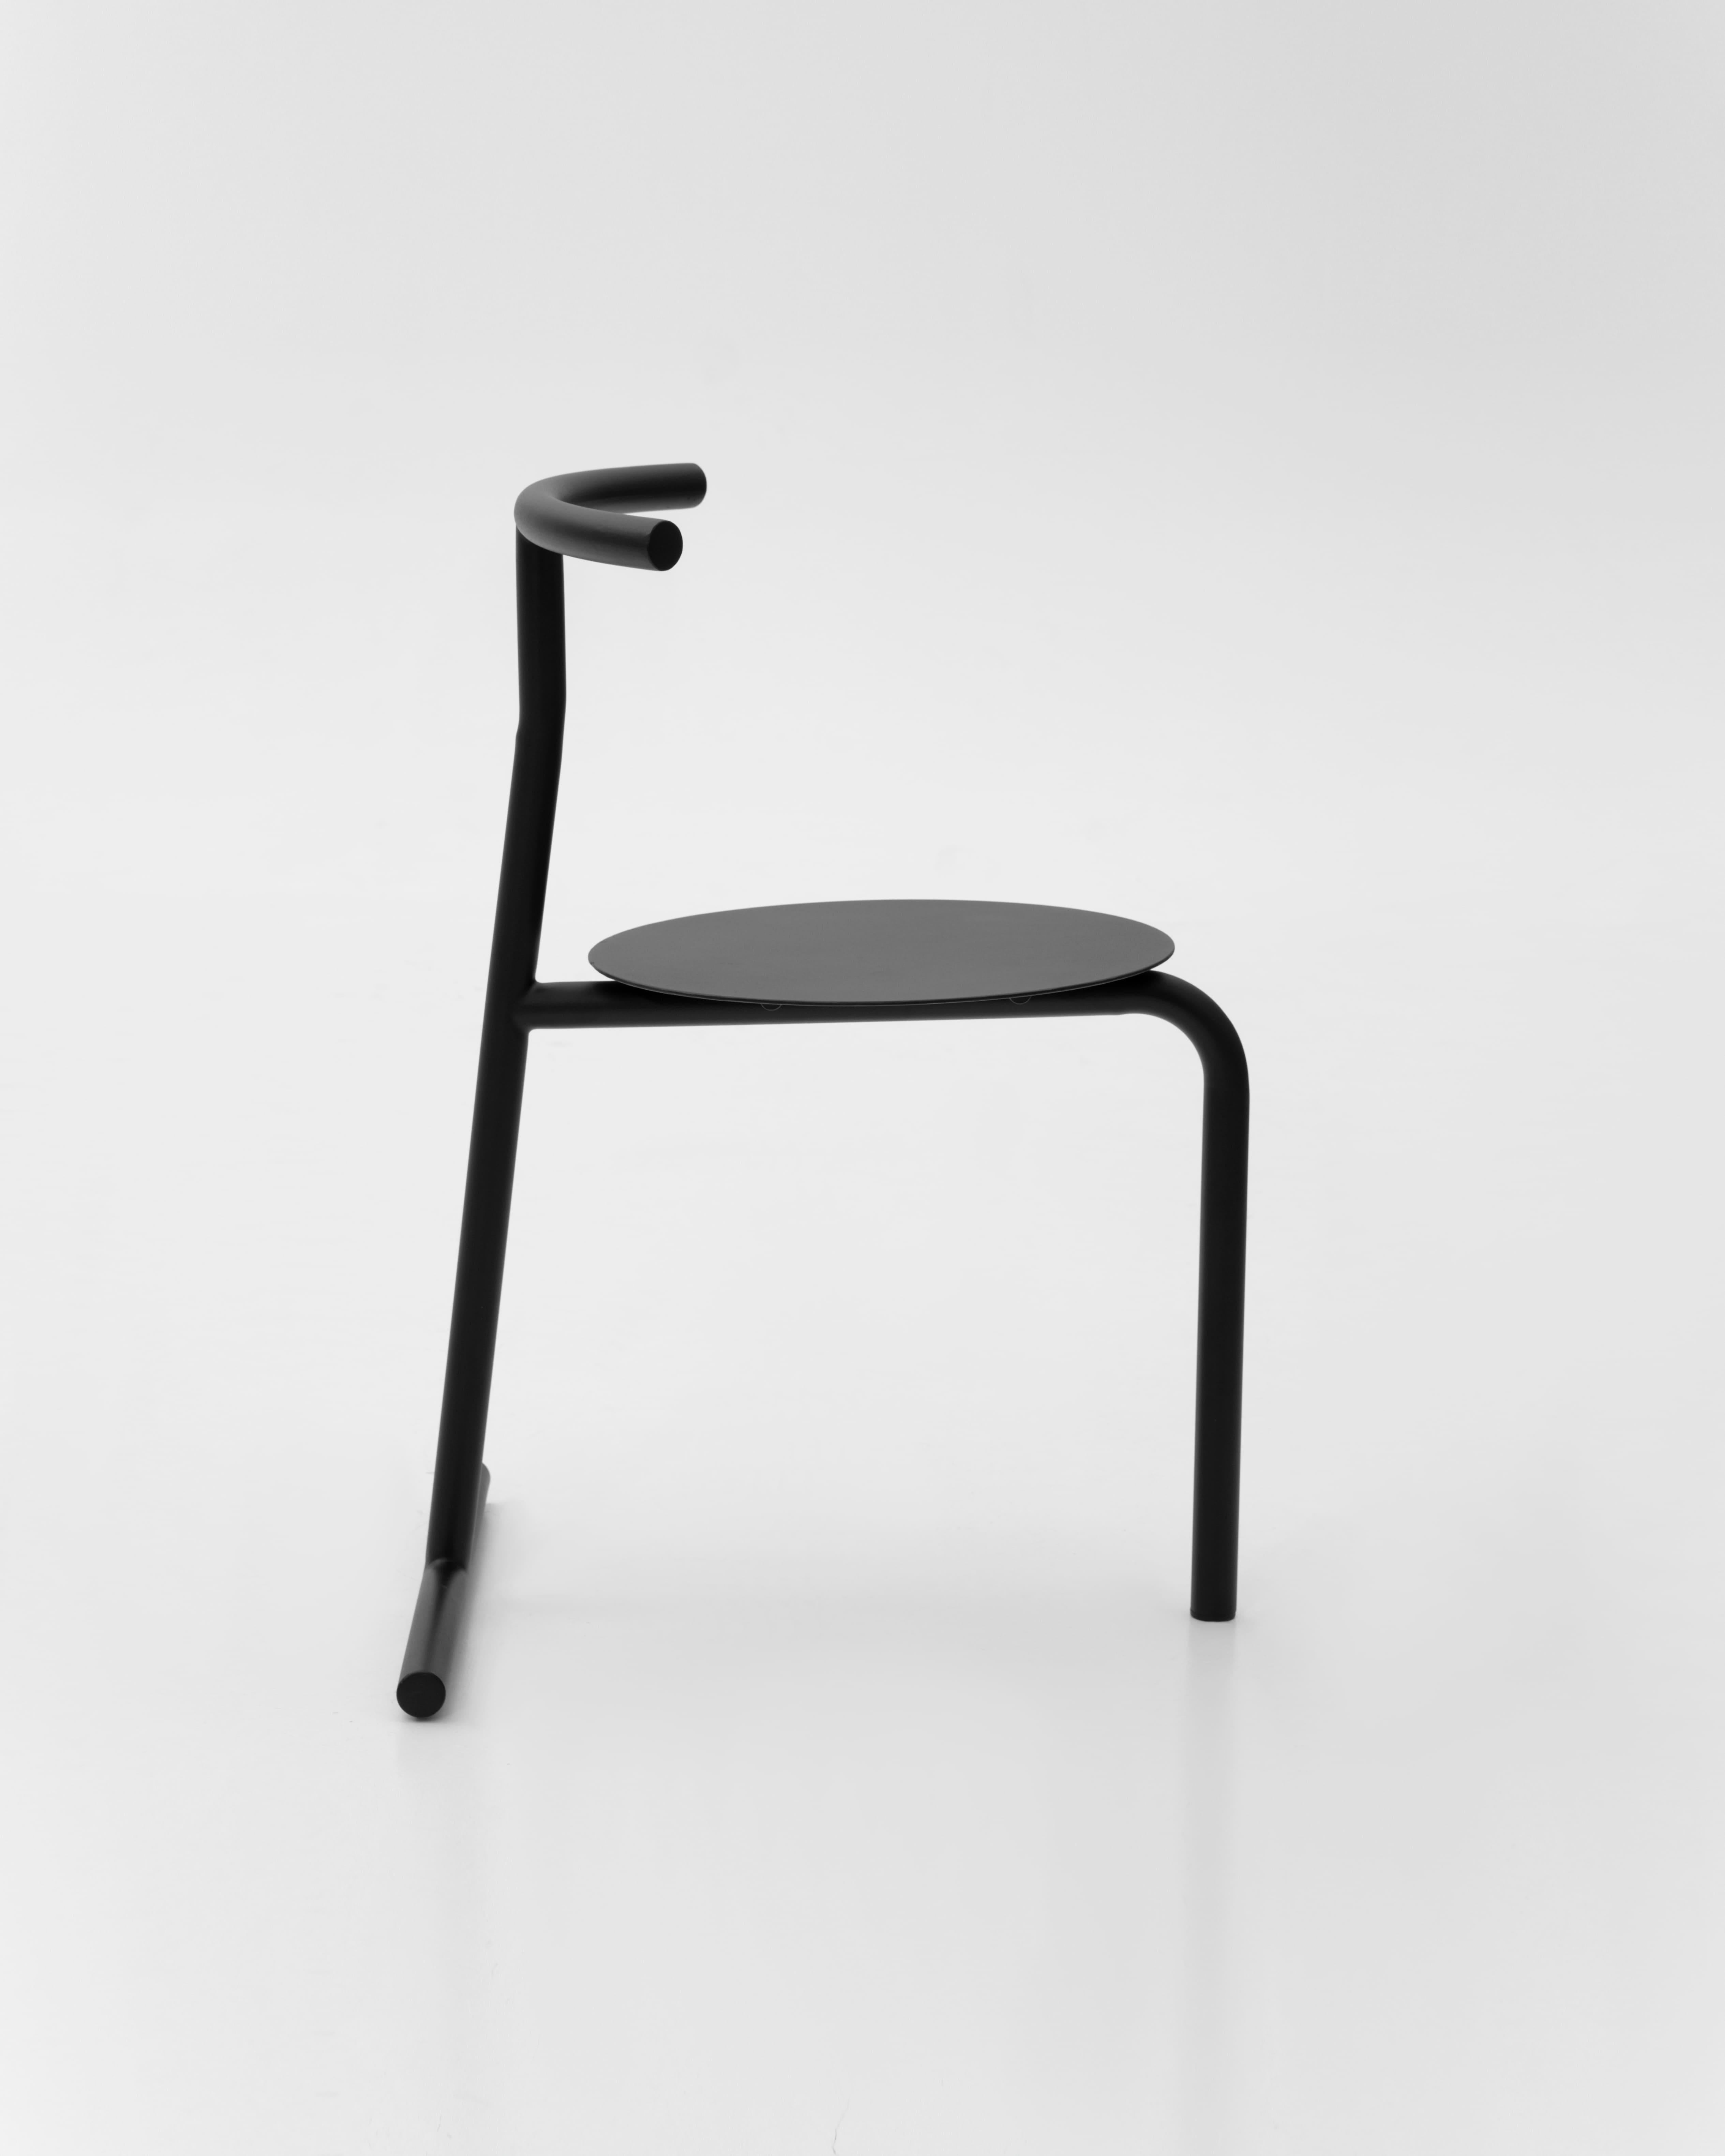 Eater Steel Seat Chair by Oito
Designed by Ivan Voitovych, 2022.
Dimensions: W 58cm x H 78cm x D 50cm. Seat height 45cm.
Materials: Powder-coated steel. 
Suitable for outdoor use. Registered design. 
Weight: 5.5 kg.

We've always wanted to